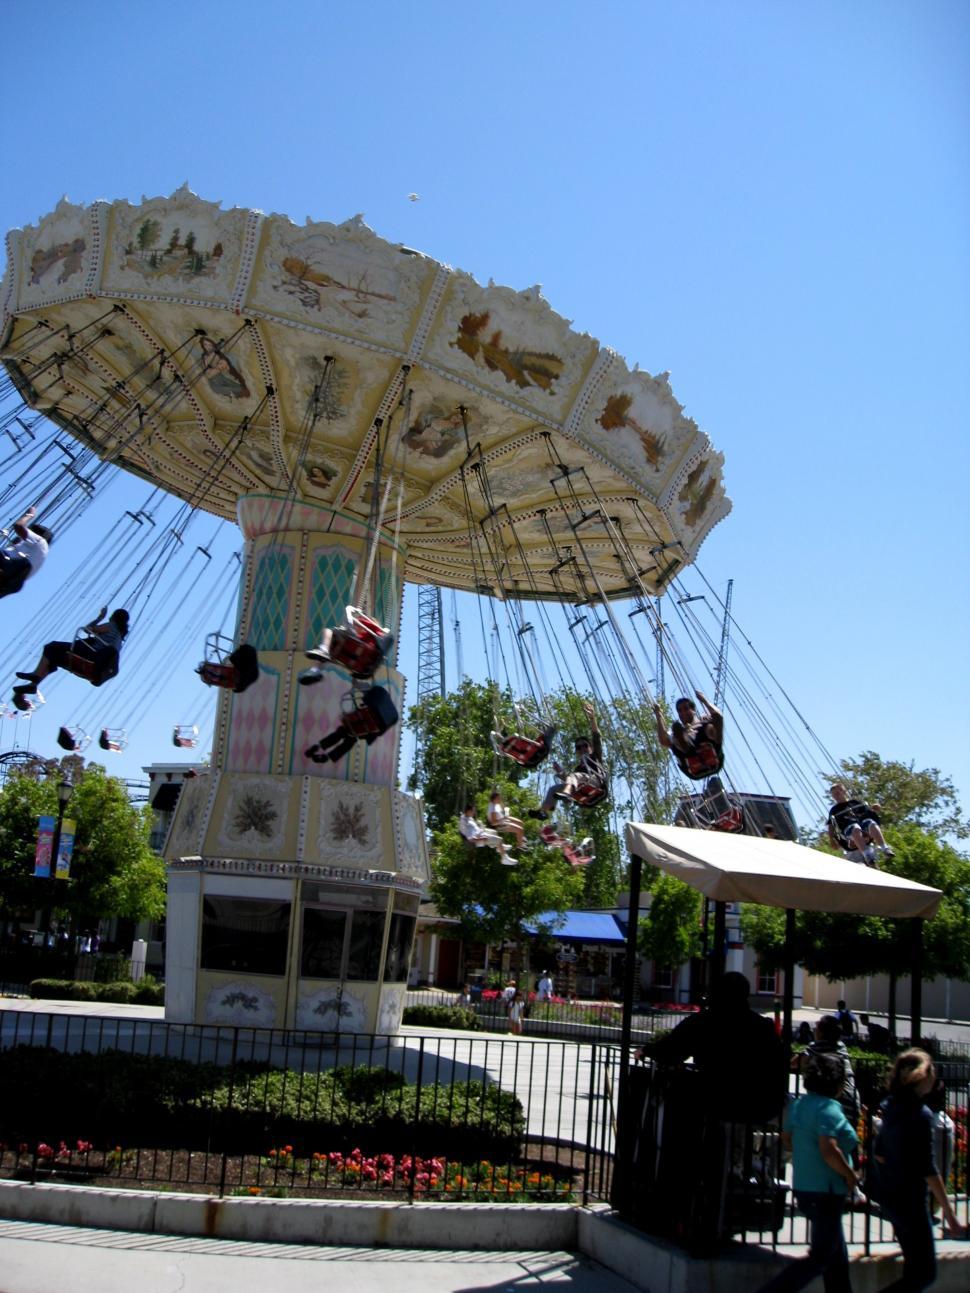 Free Image of A Merry Go Round in a Park on a Sunny Day 